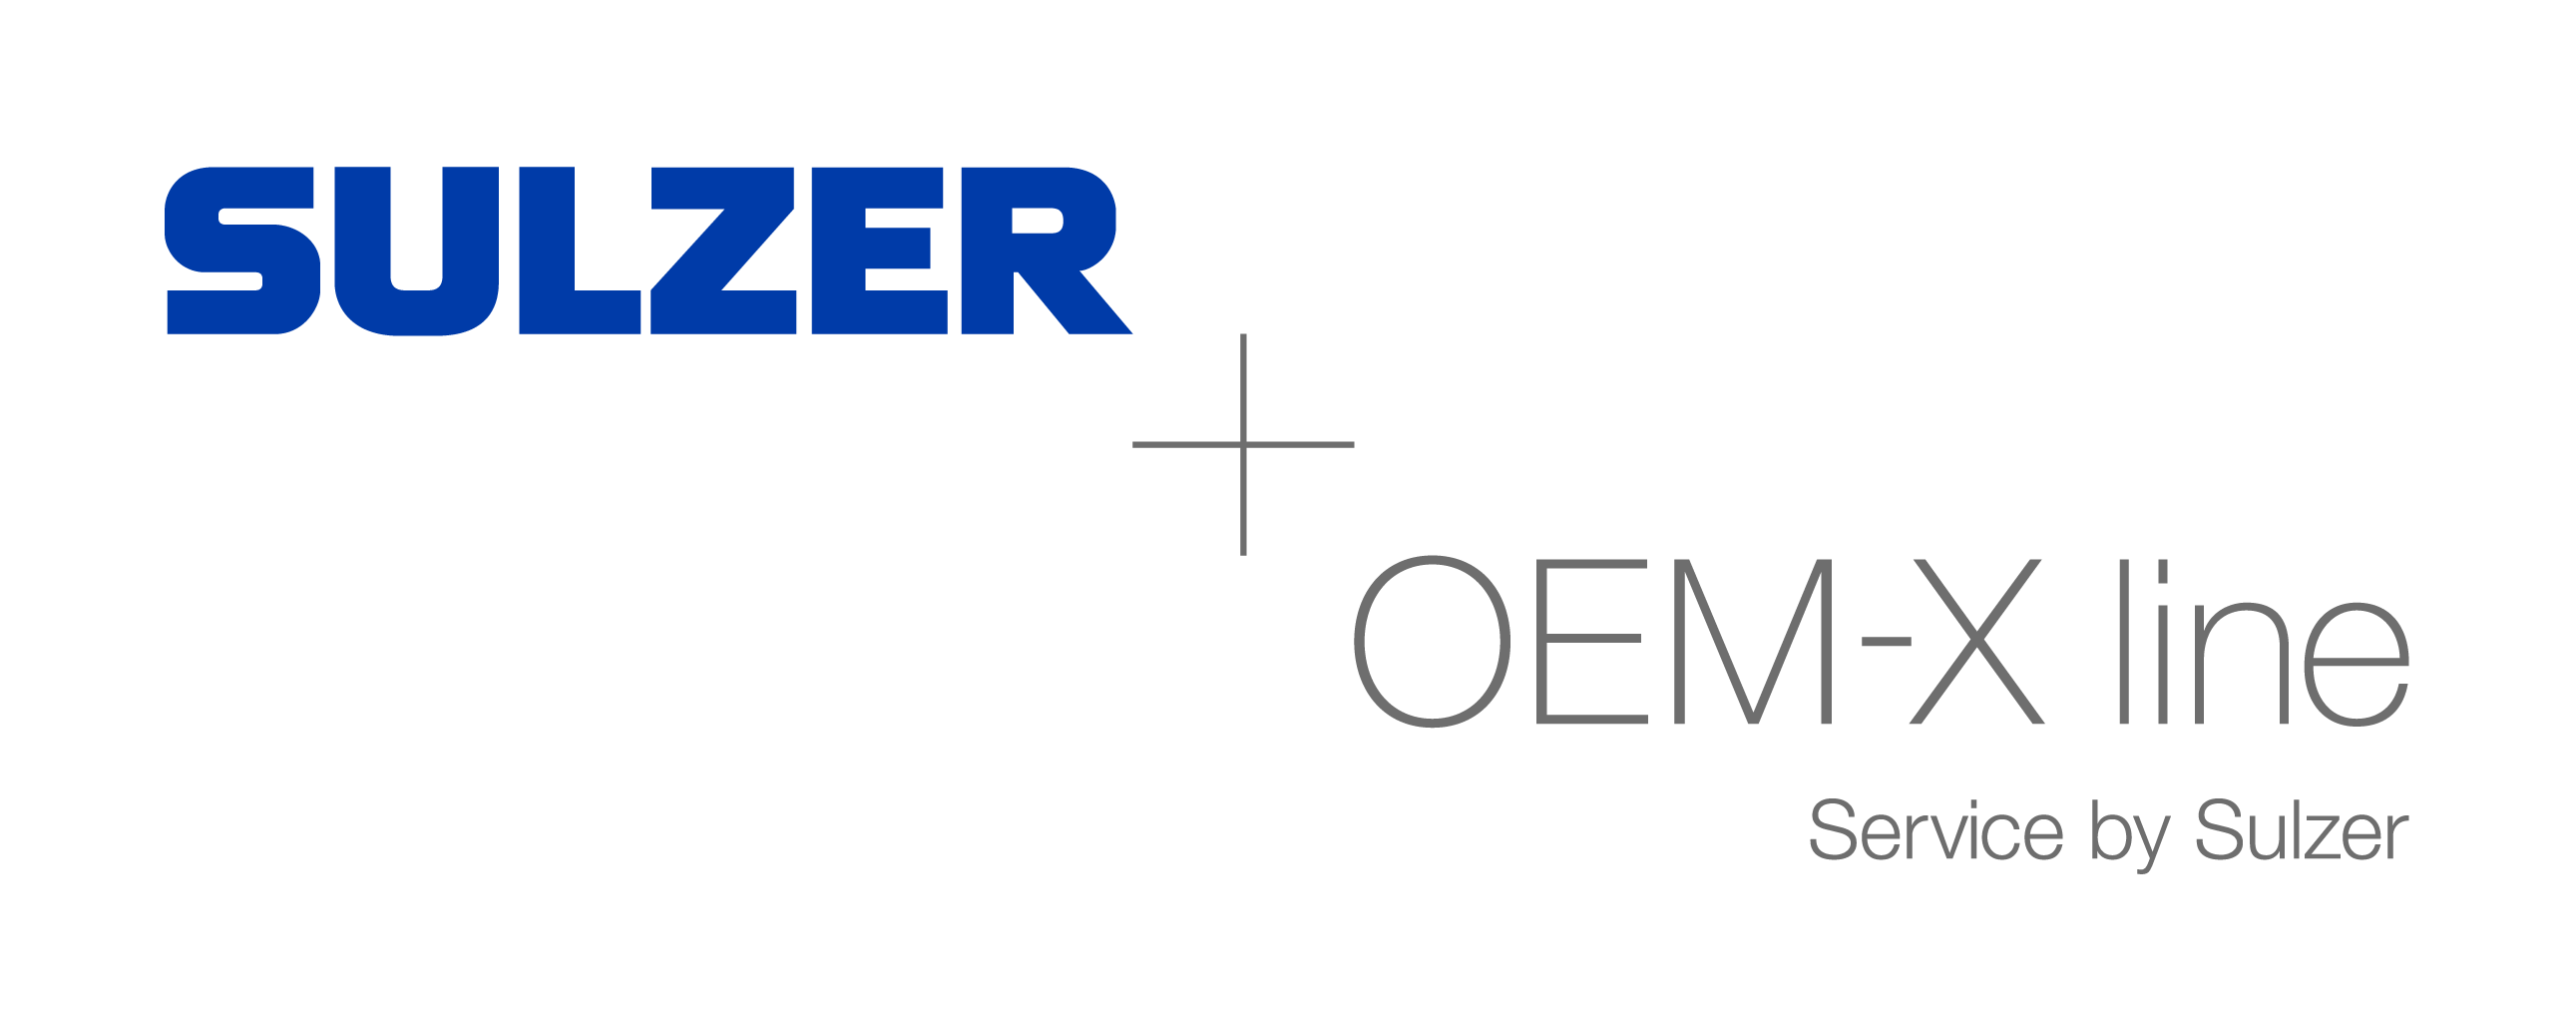 Sulzer is launching OEM-X line - the only 24/7 quality pump service with flexible repair and retrofit solutions for any pump brand.